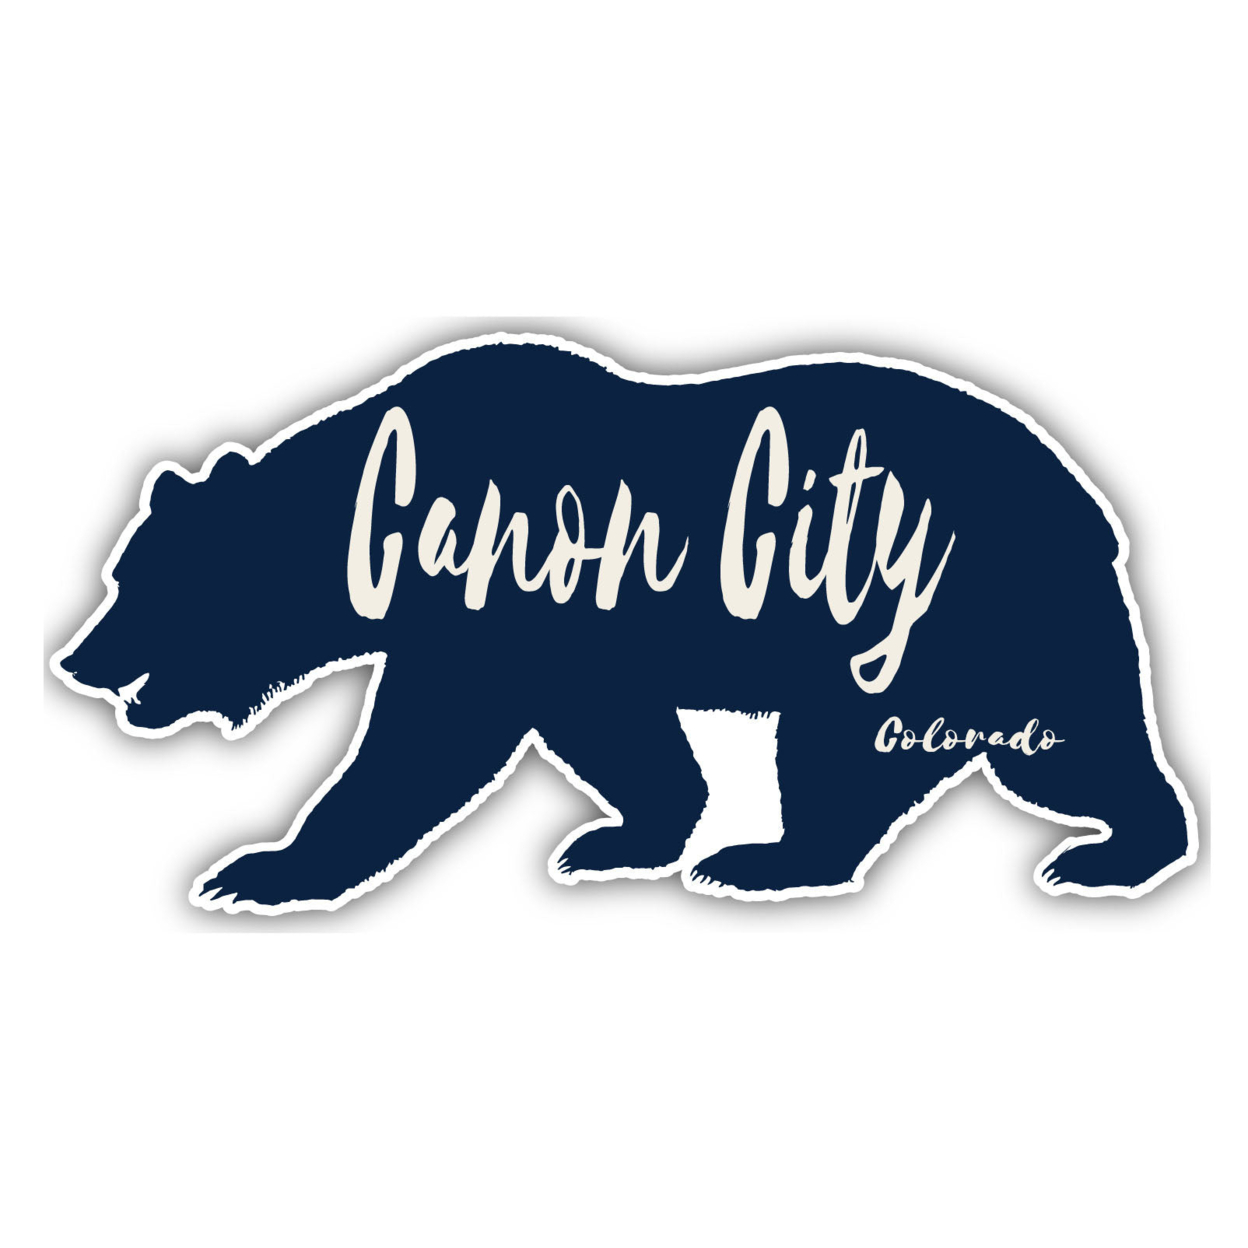 Canon City Colorado Souvenir Decorative Stickers (Choose Theme And Size) - 4-Pack, 4-Inch, Camp Life